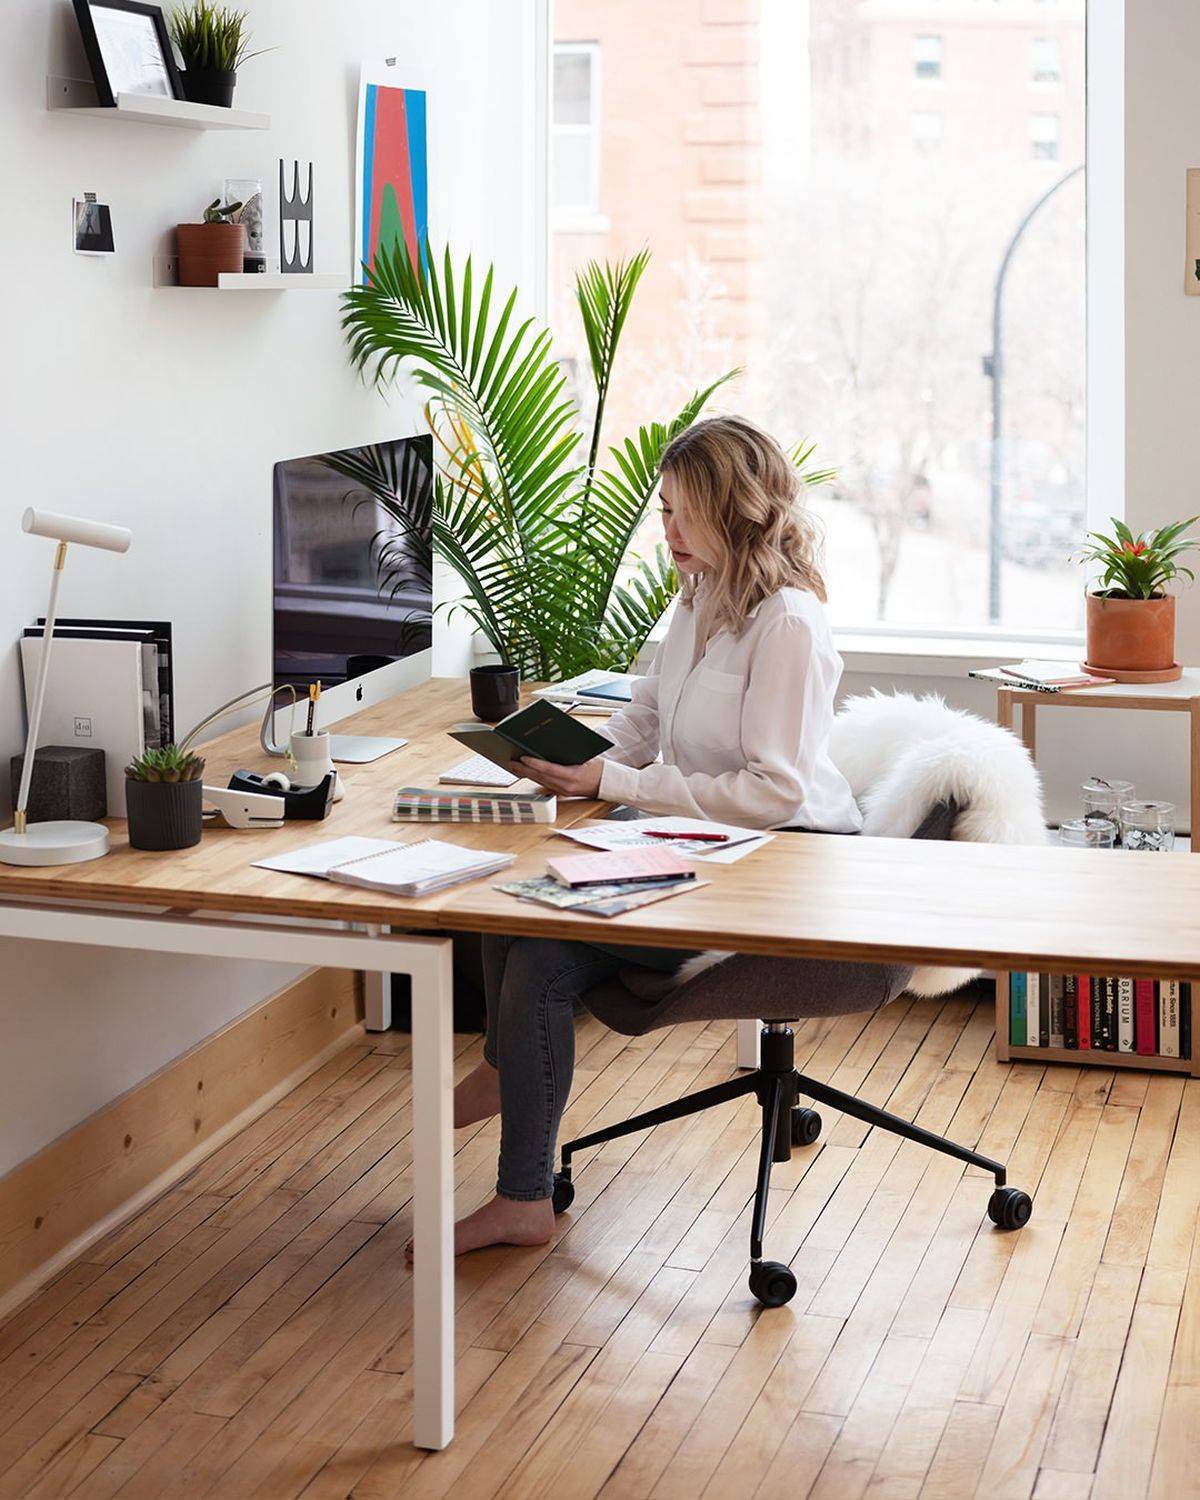 Work from Home: Home Offices Embrace Versatility and Productivity in
2022